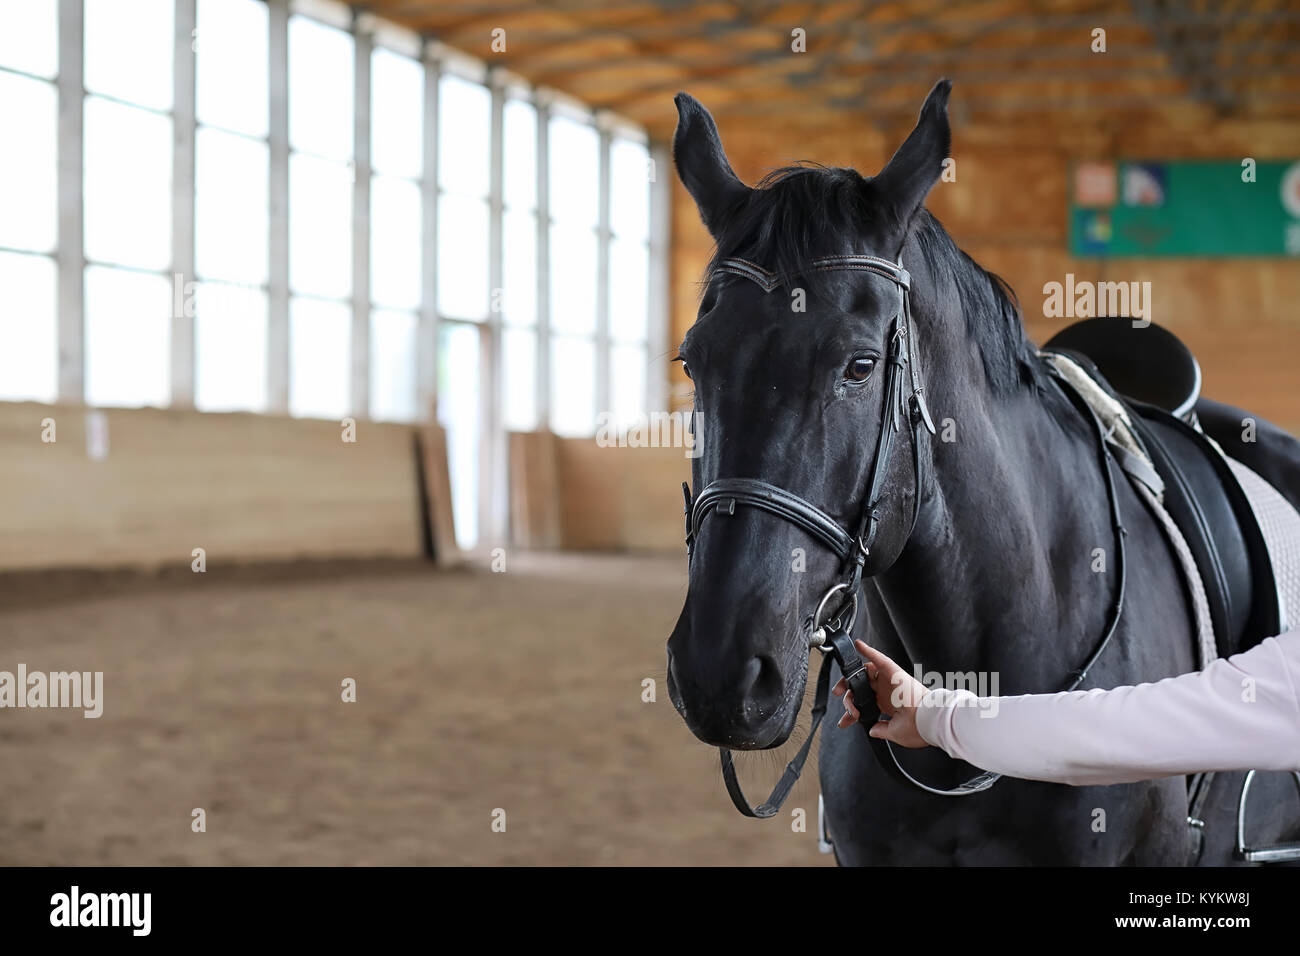 People on a horse training in a wooden arena Stock Photo